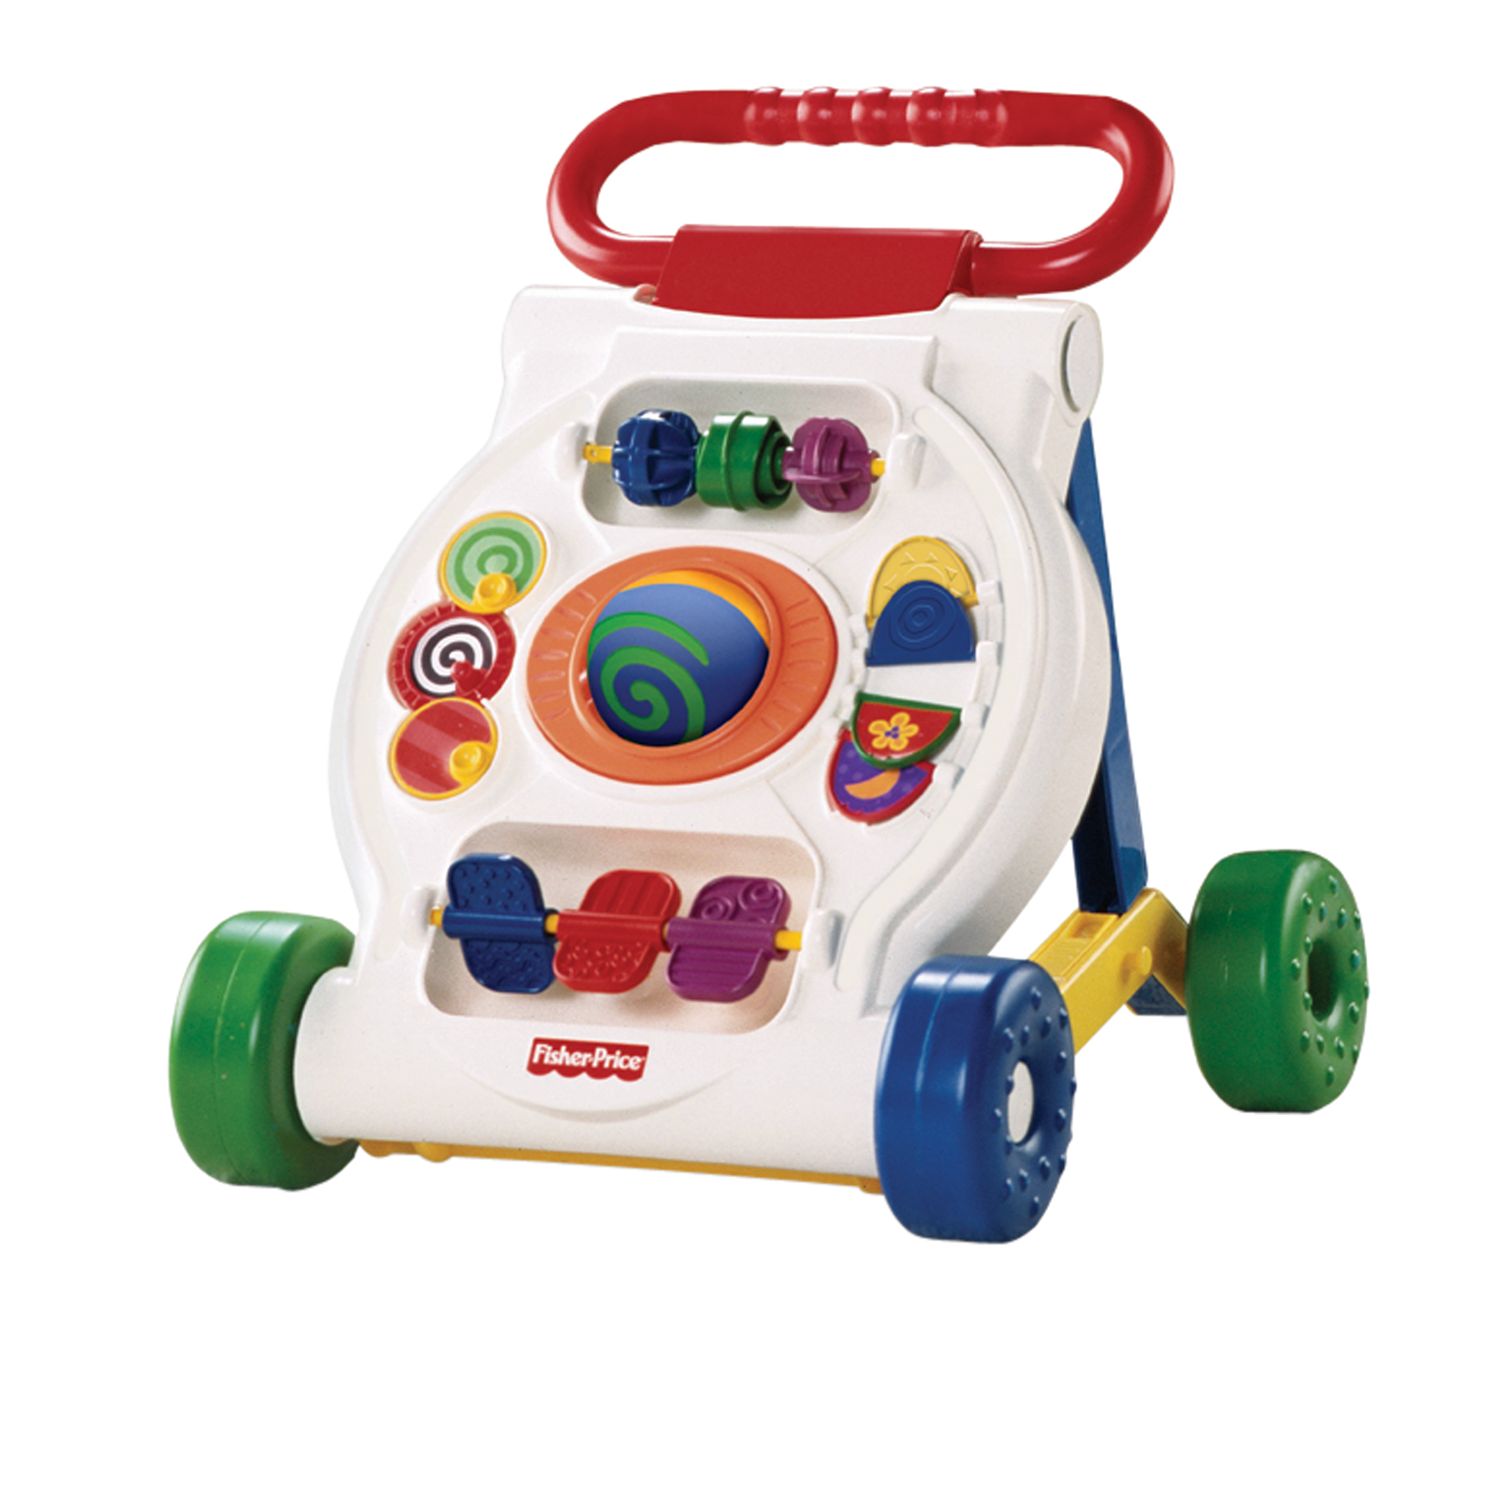 fisher and price baby walker